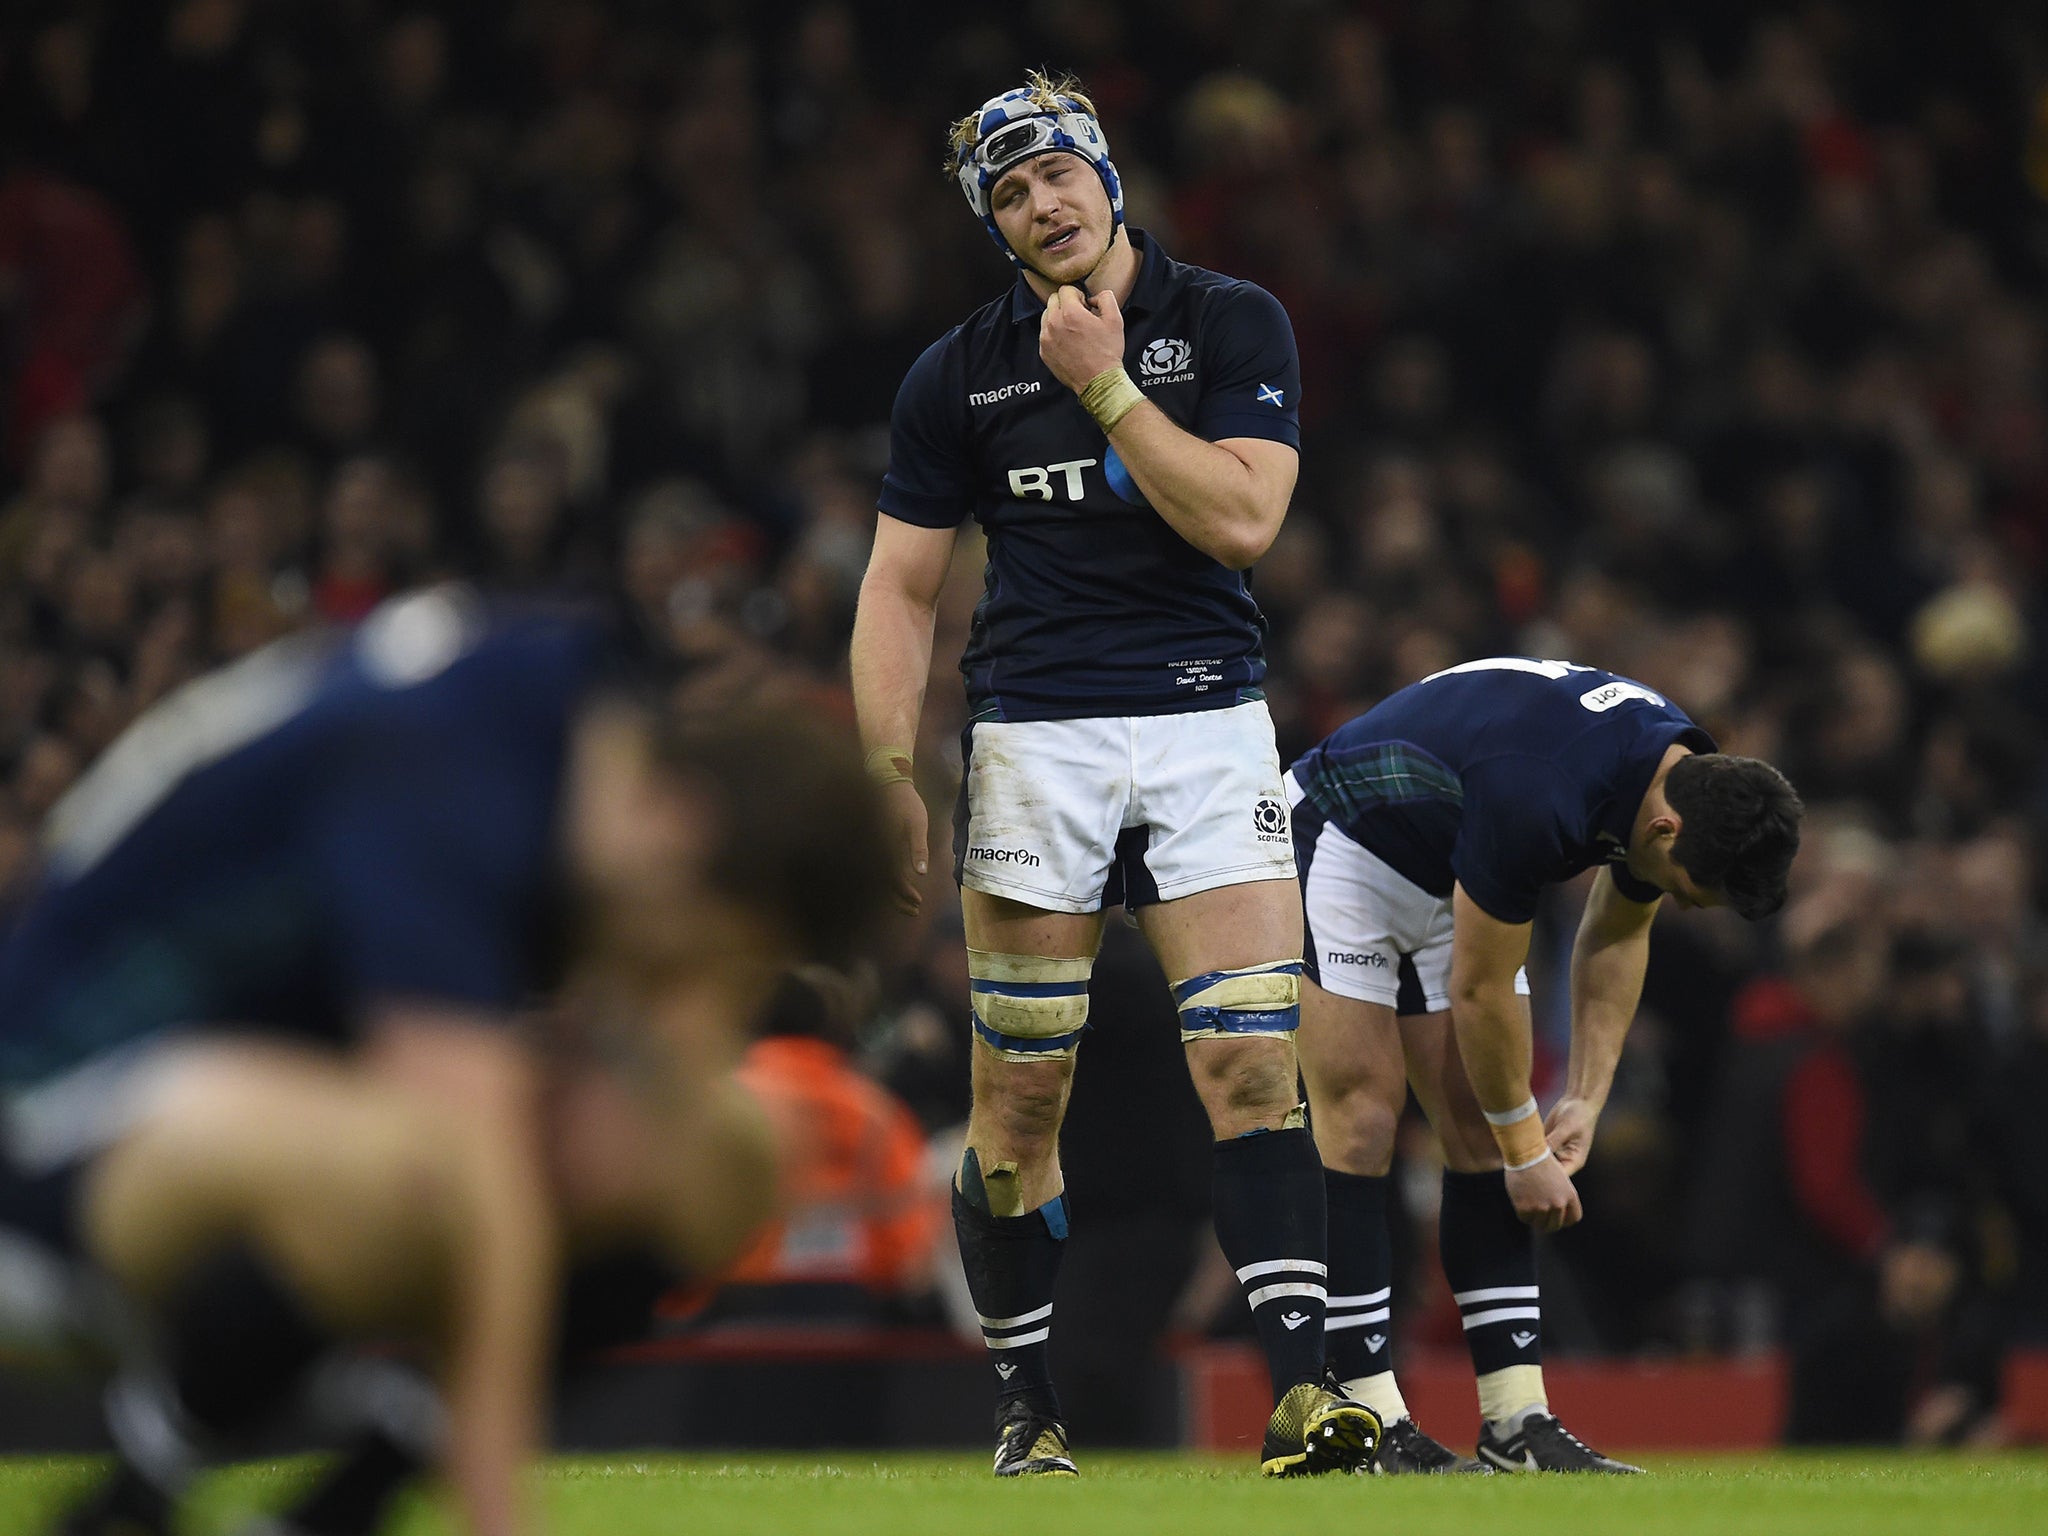 Scotland were left heartbroken by a Welsh two-try burst to win the game in Cardiff